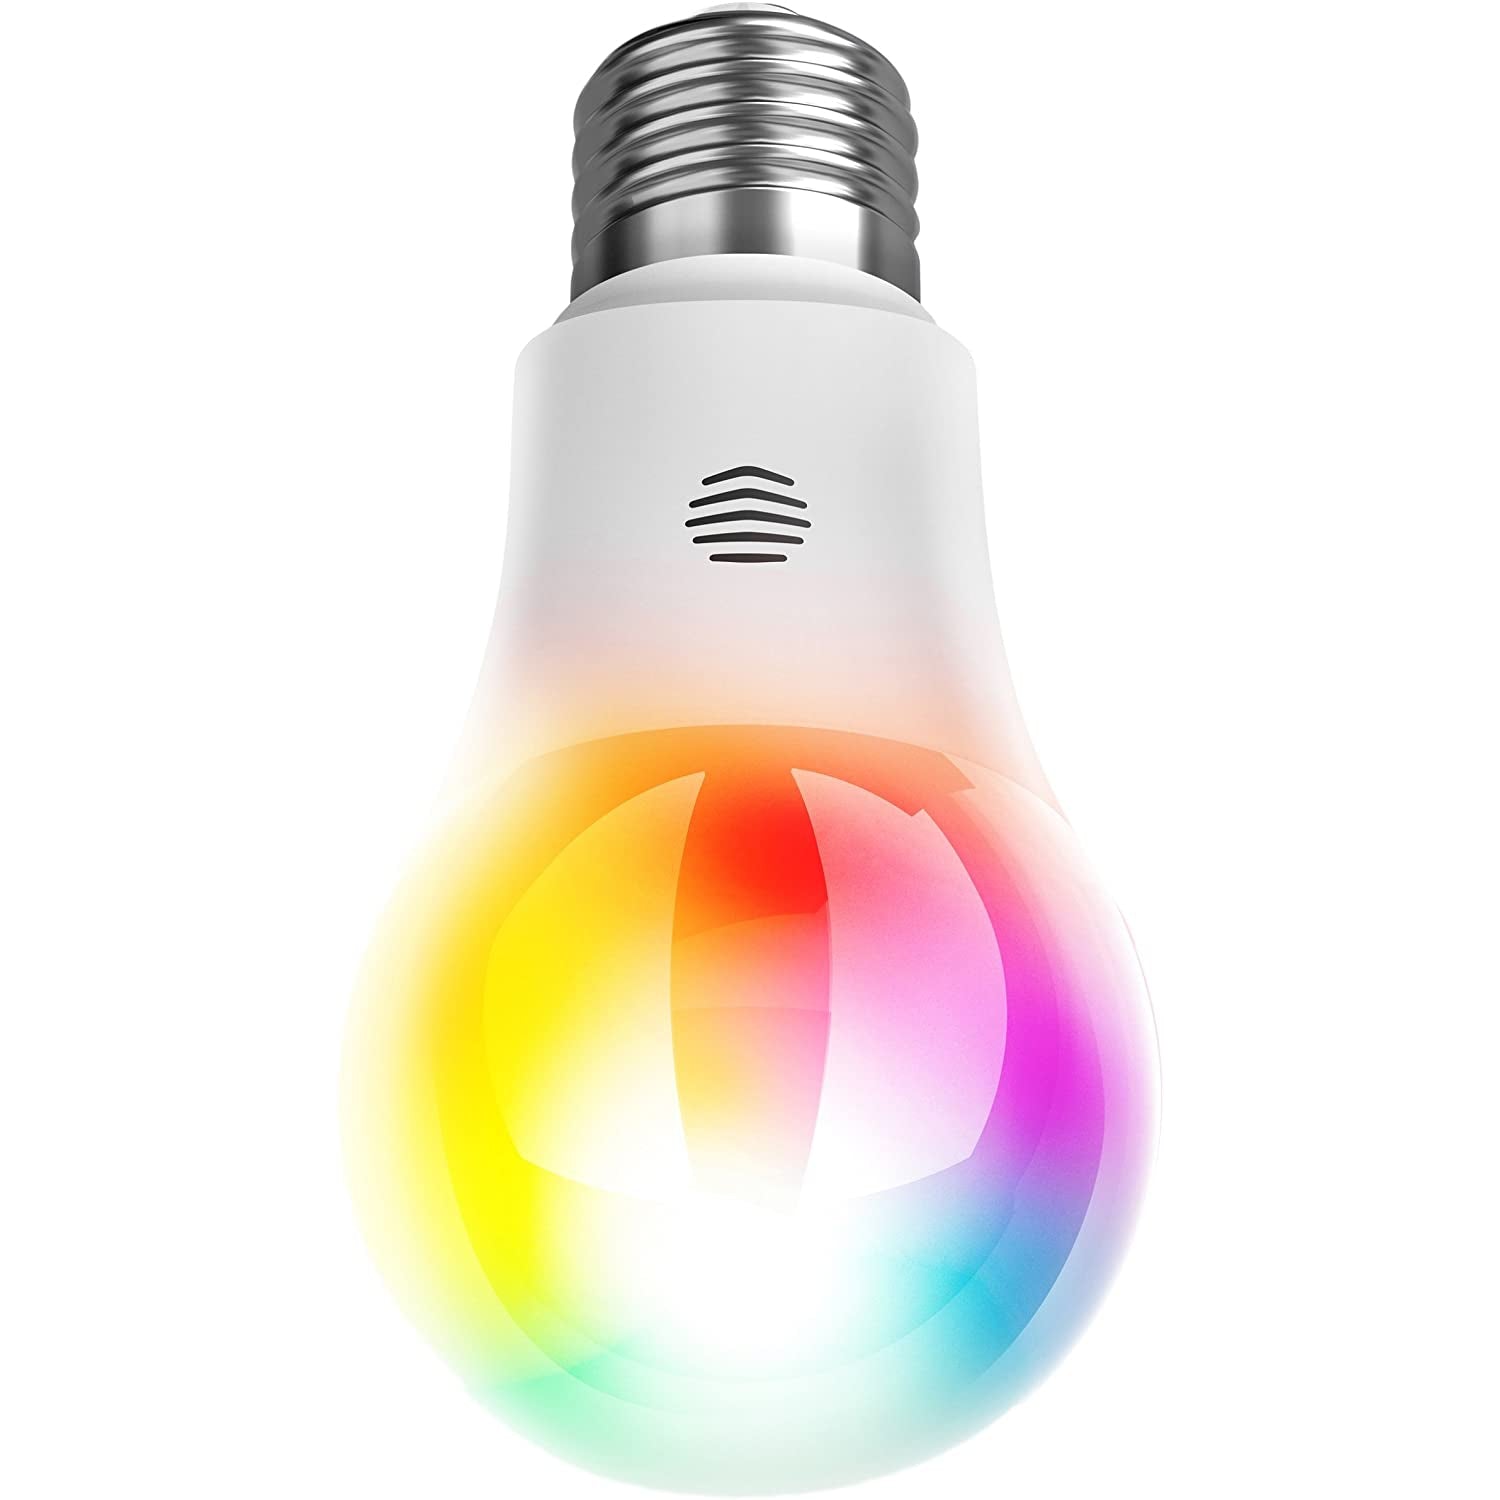 Hive Light Colour Changing Smart Bulb with E27 Screw-Works with Amazon Alexa - 9.5W